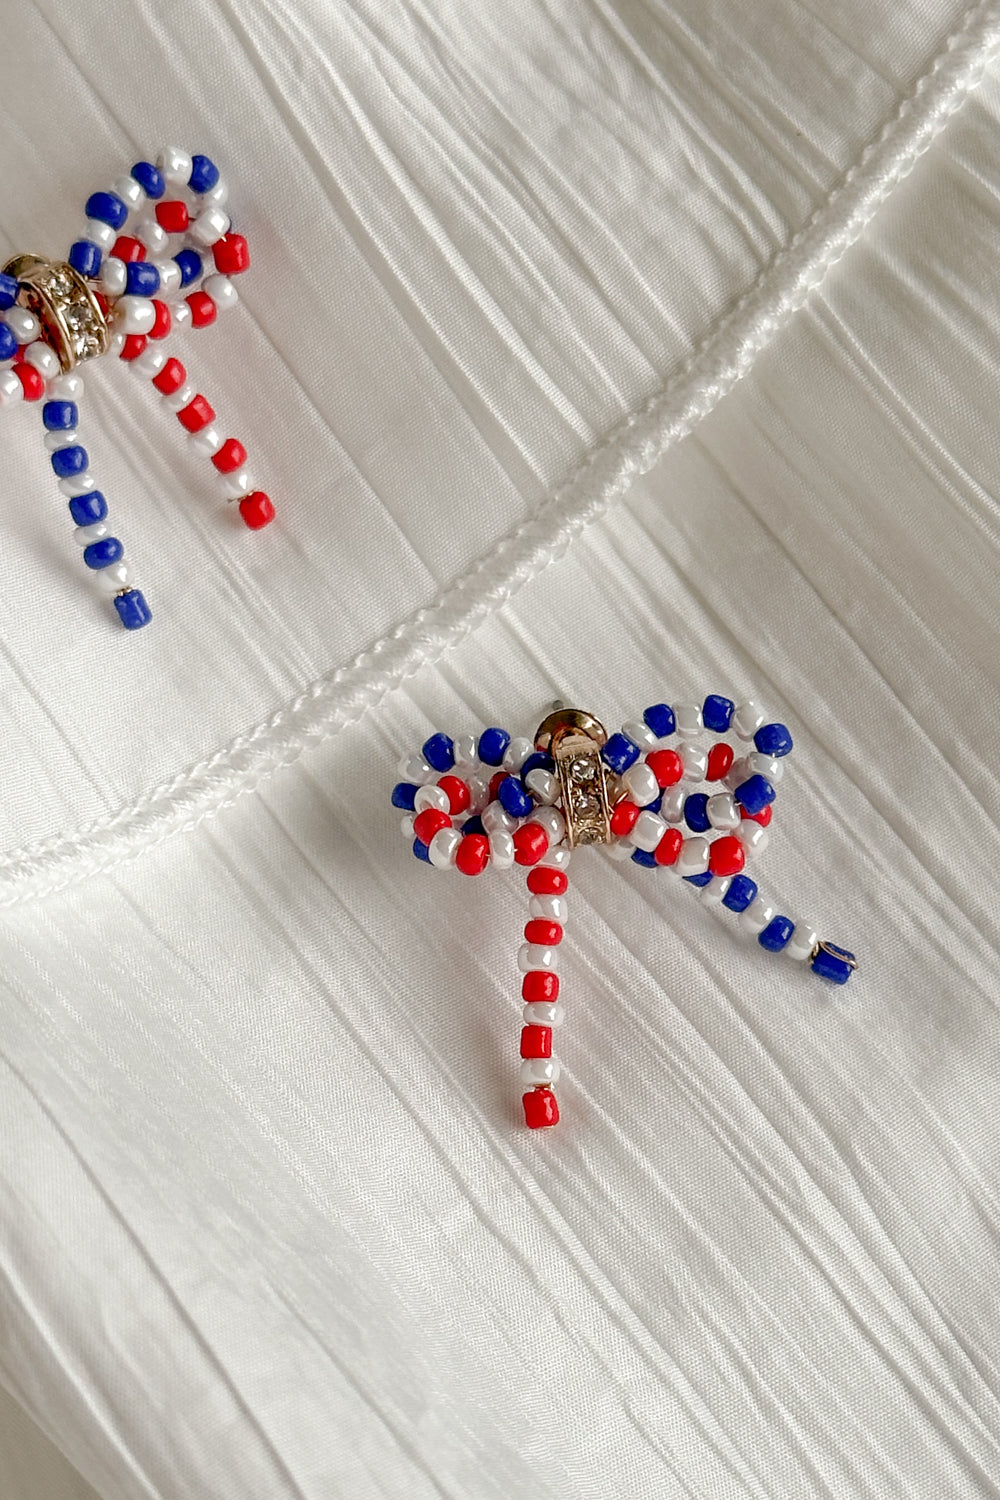 Image shows Quinn Red, White, & Blue Bow Earrings against a white background. Earrings have red white and blue beads in the shape of a bow, and the center is gold with rhinestones.